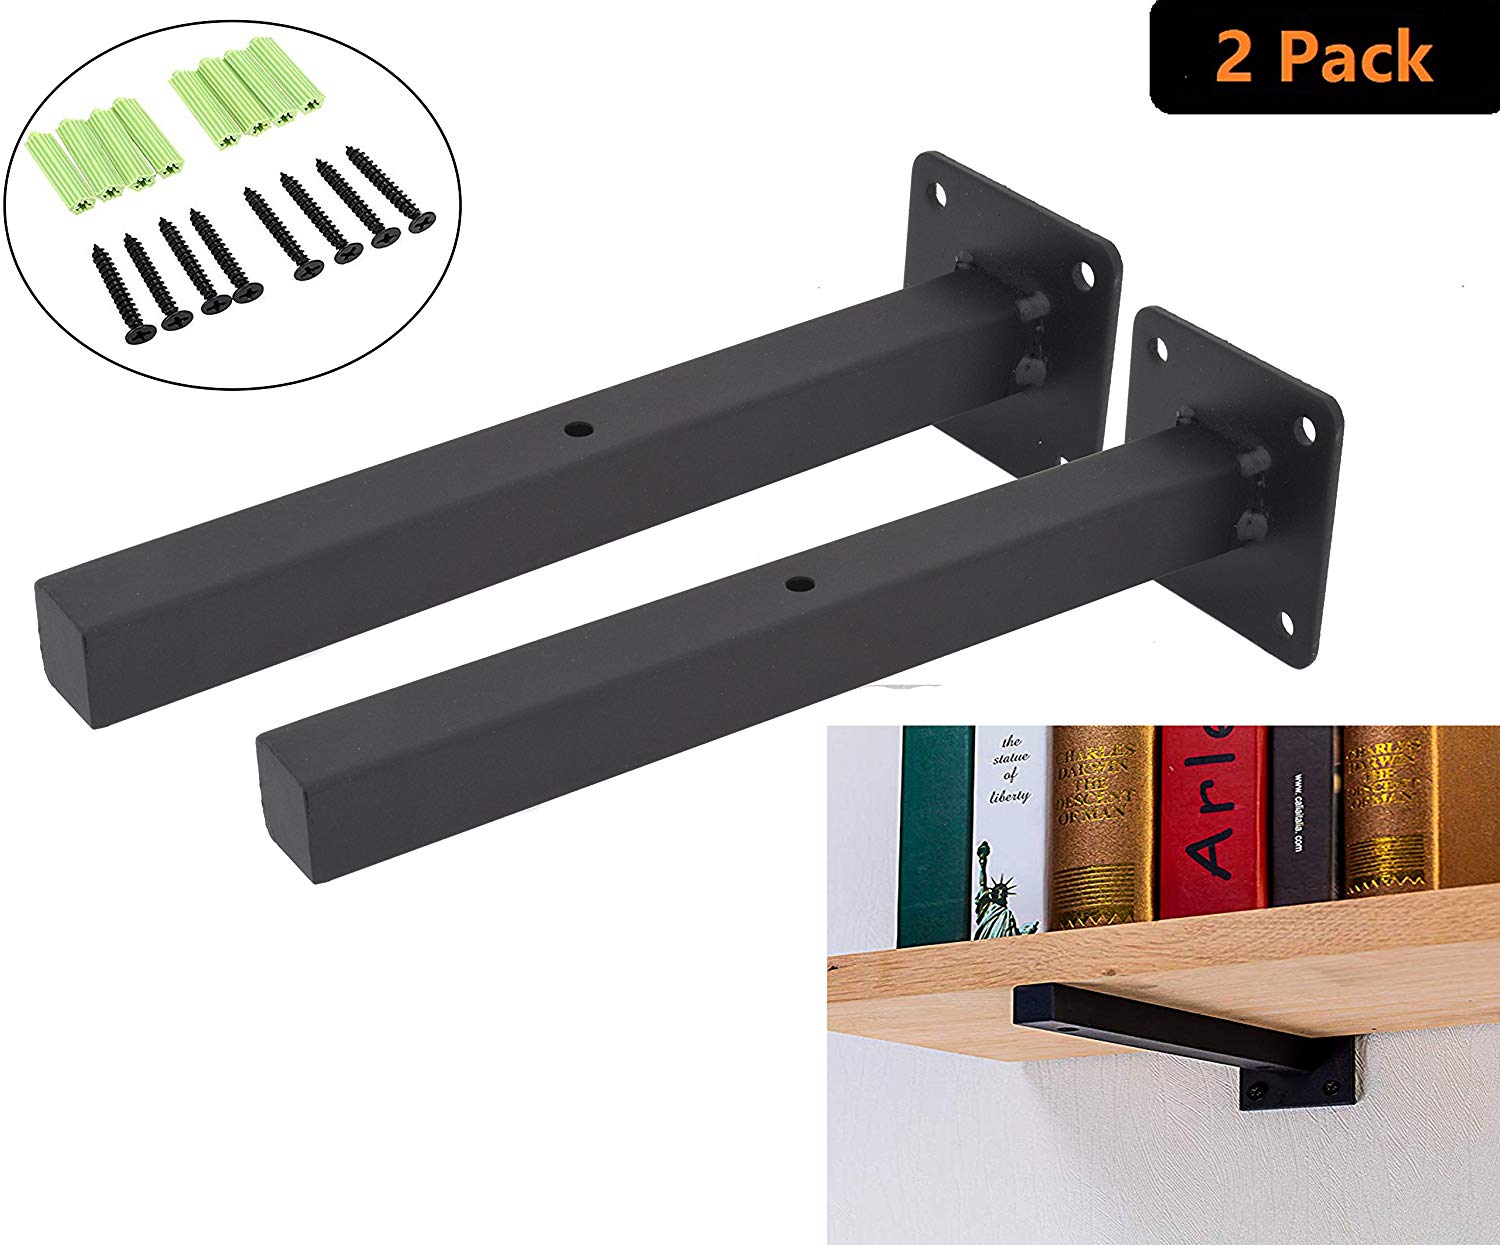 industrial black floating shelf brackets retro wall mount bracket mounted supports includes screws anchors square inch addgrace home media bench furniture vintage metal large shoe